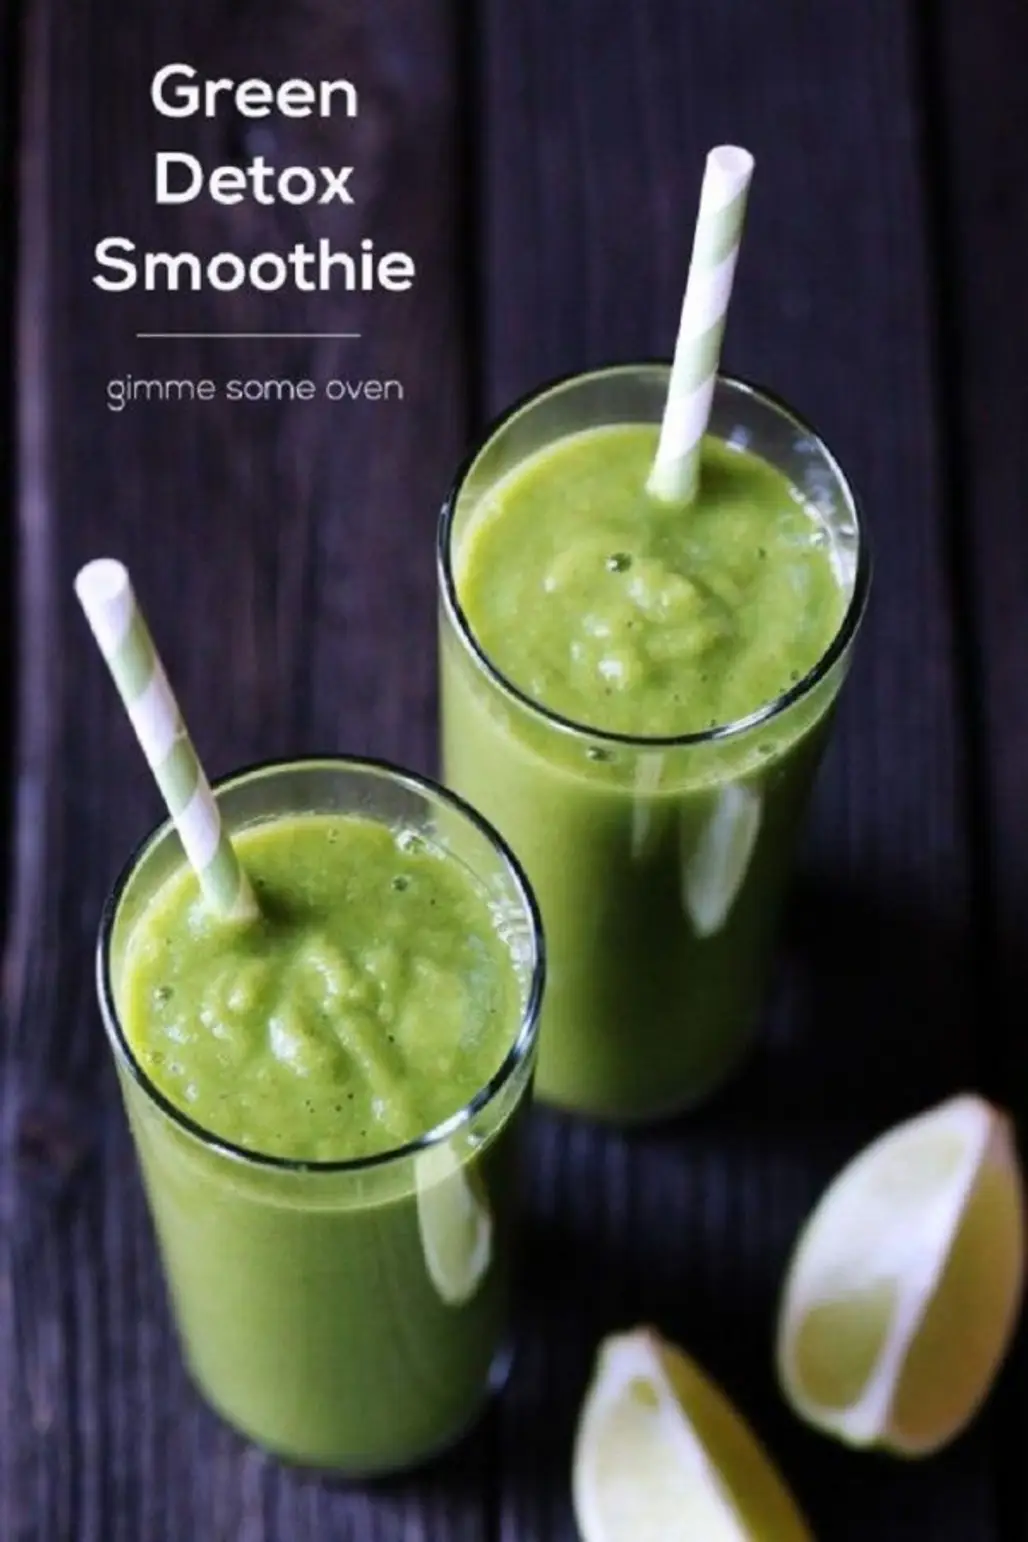 An Ideal Morning Smoothie